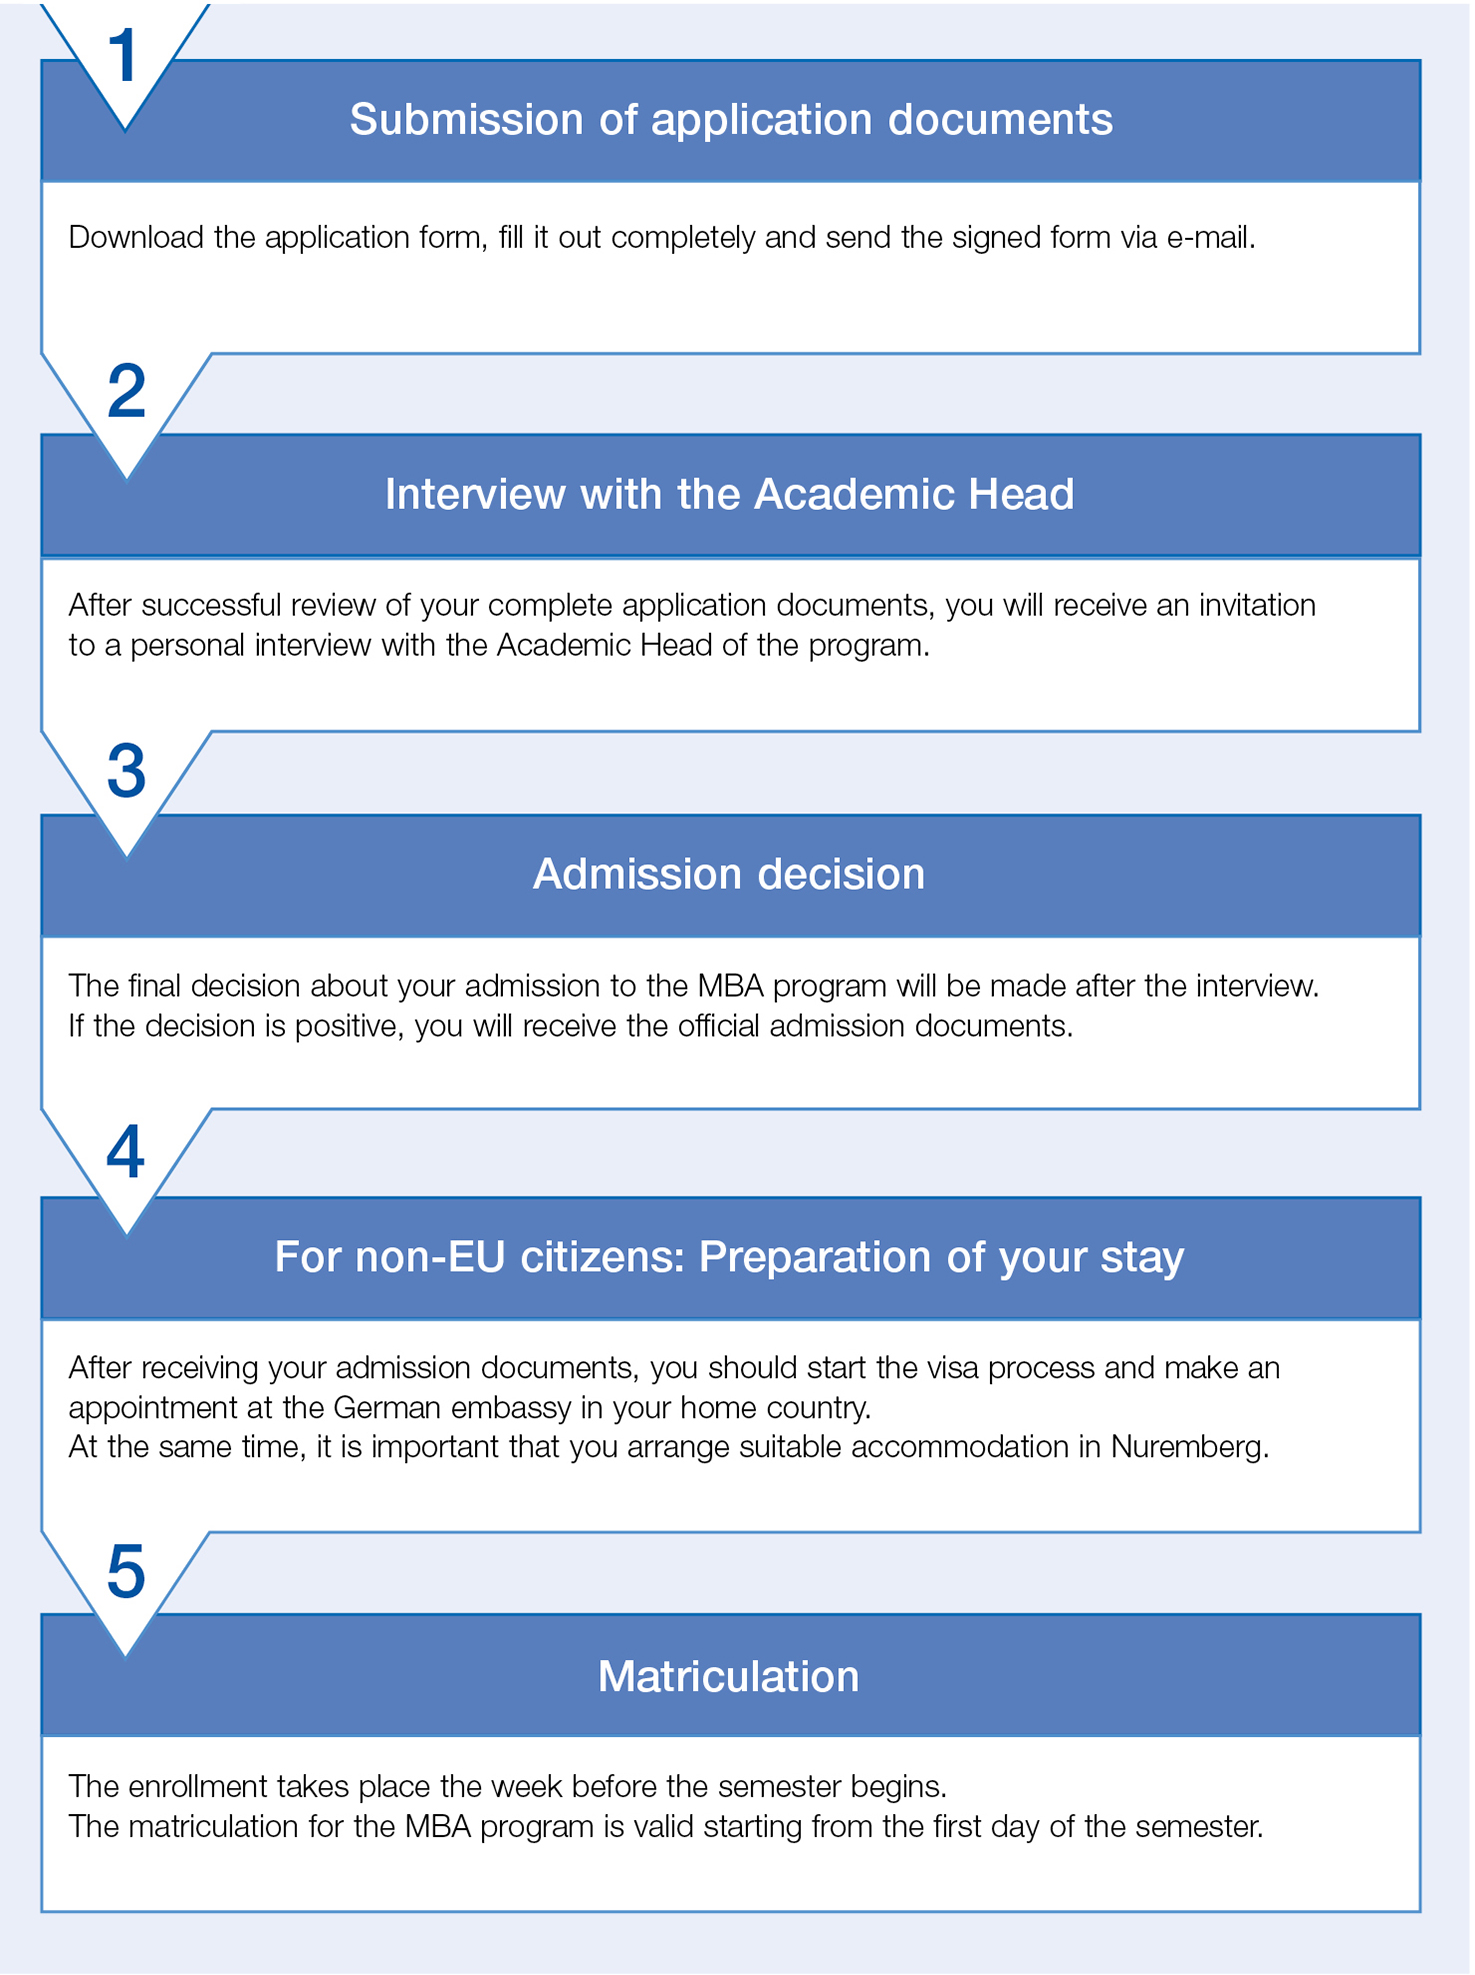 Overview MBA application process